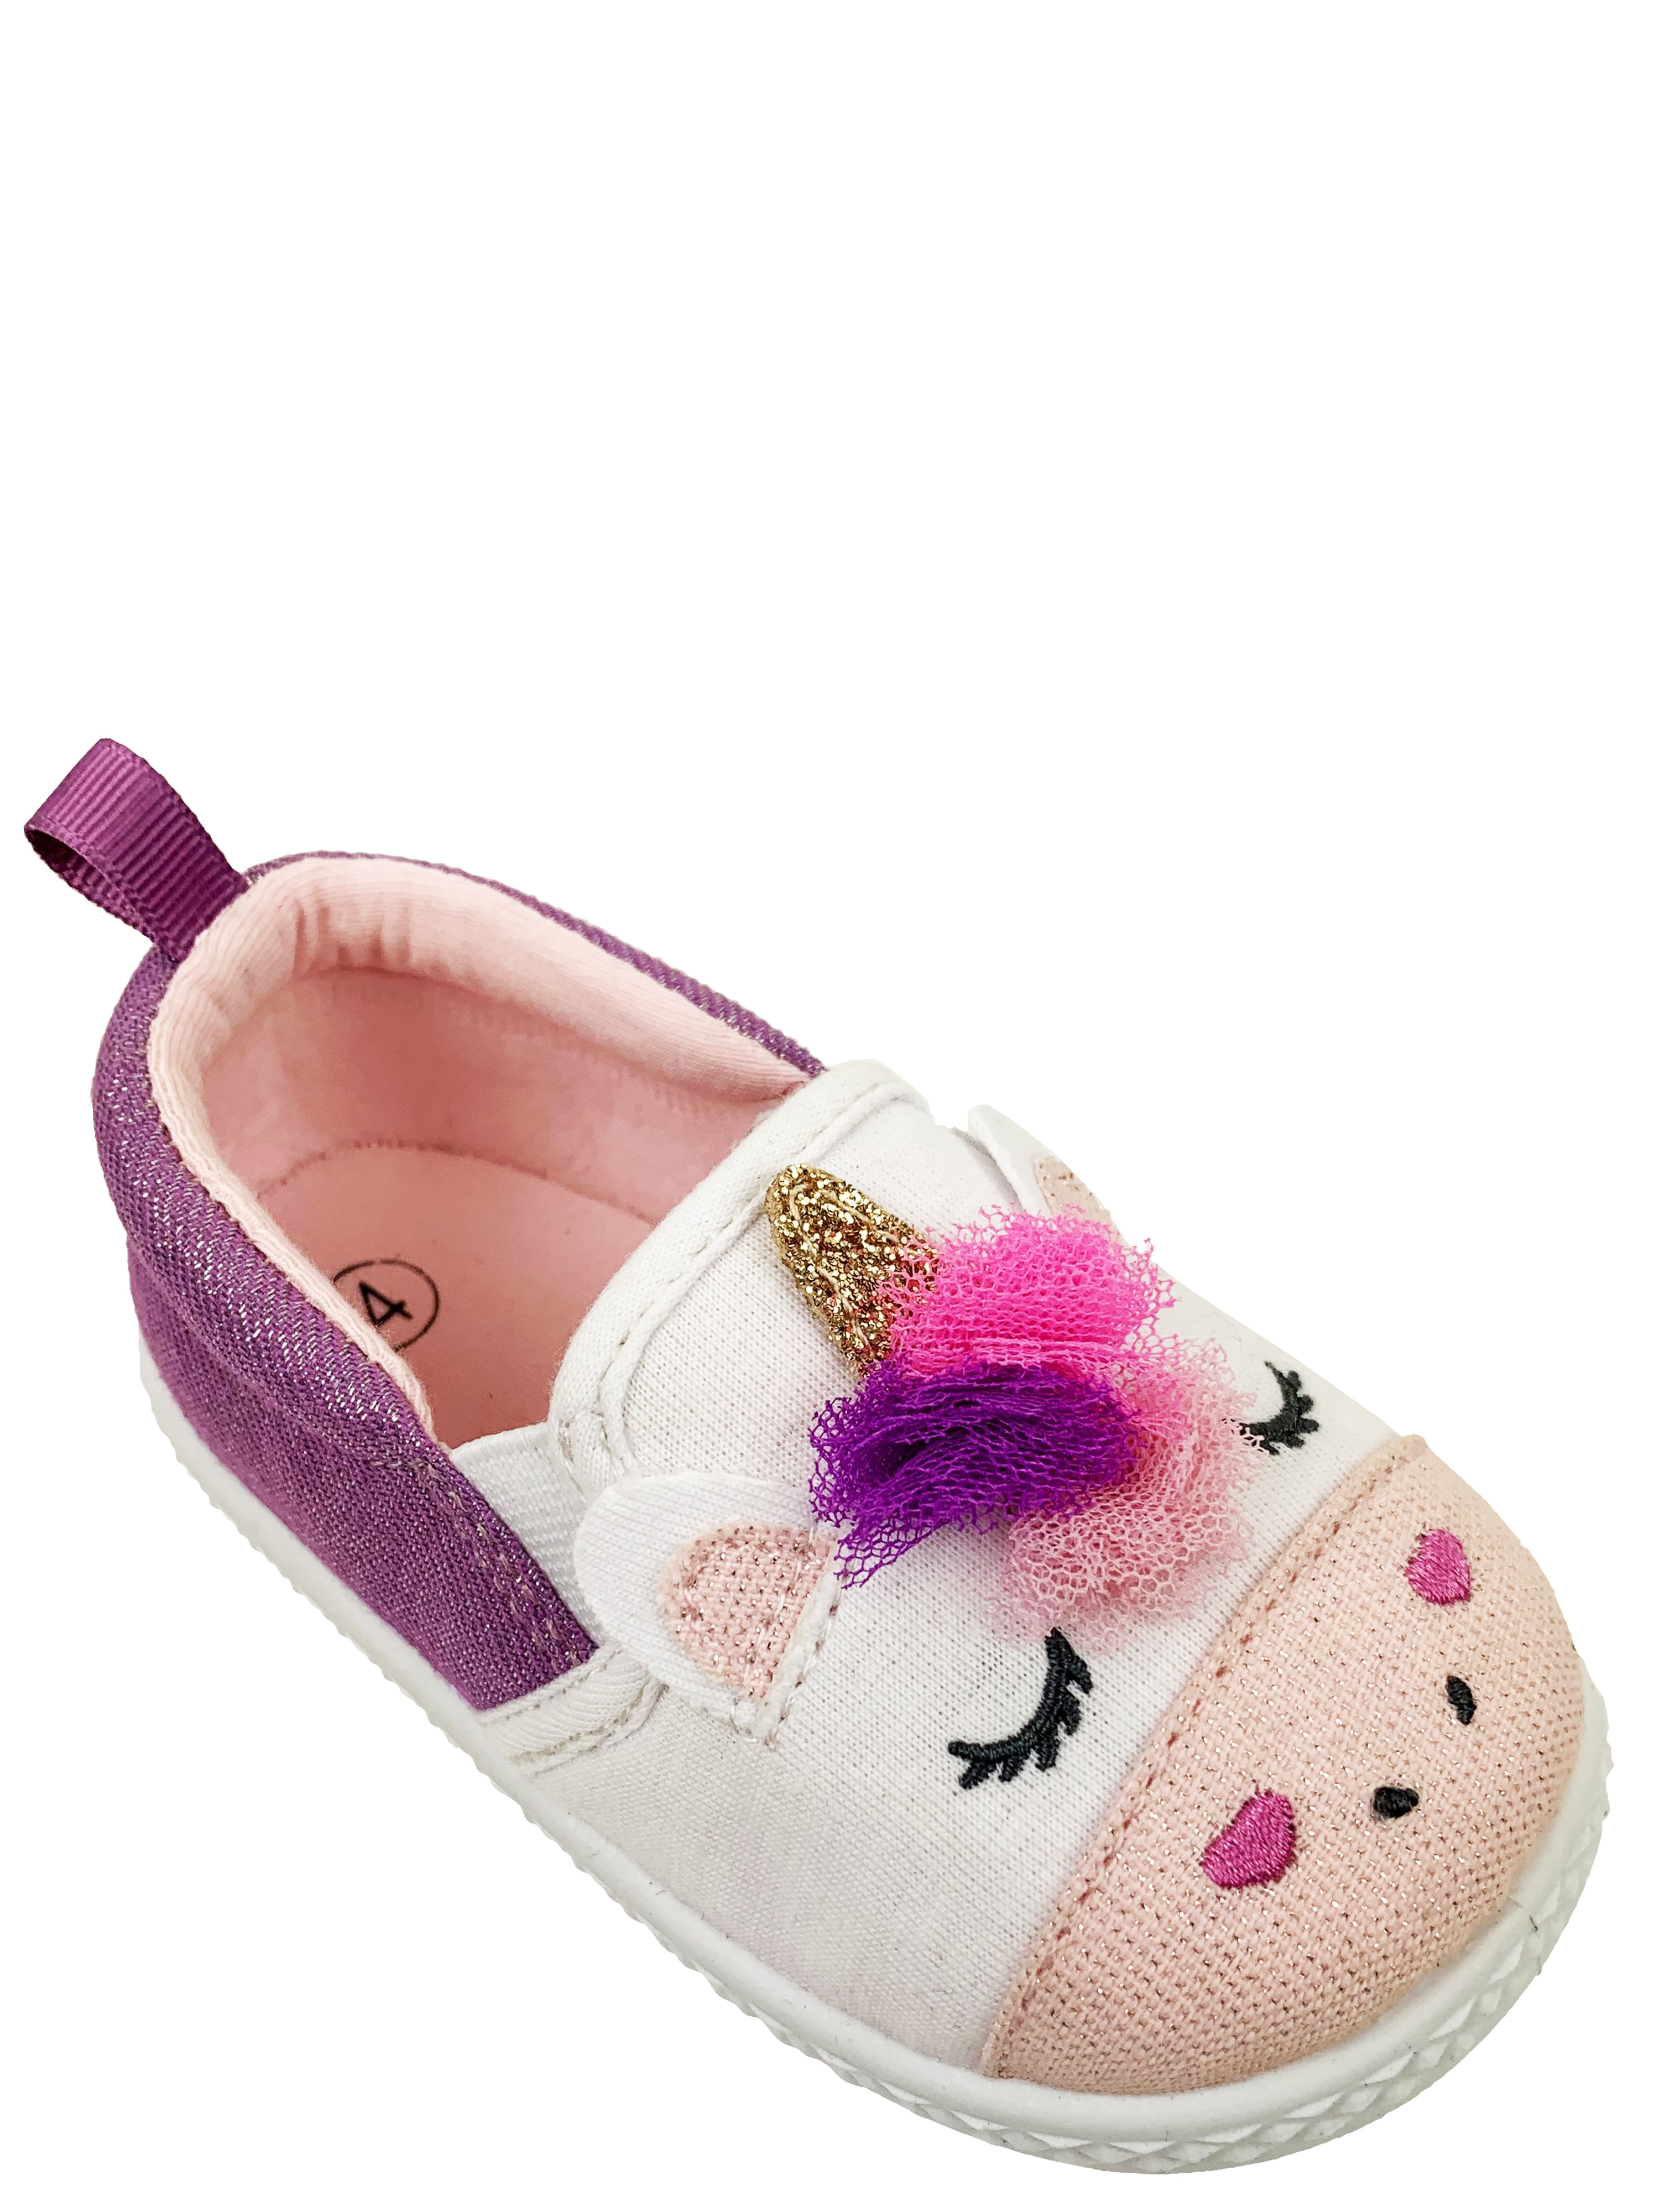 Unicorns Soft Leather Flat Shoes For Girls Kids Sandals Casual Toddler Slippers 